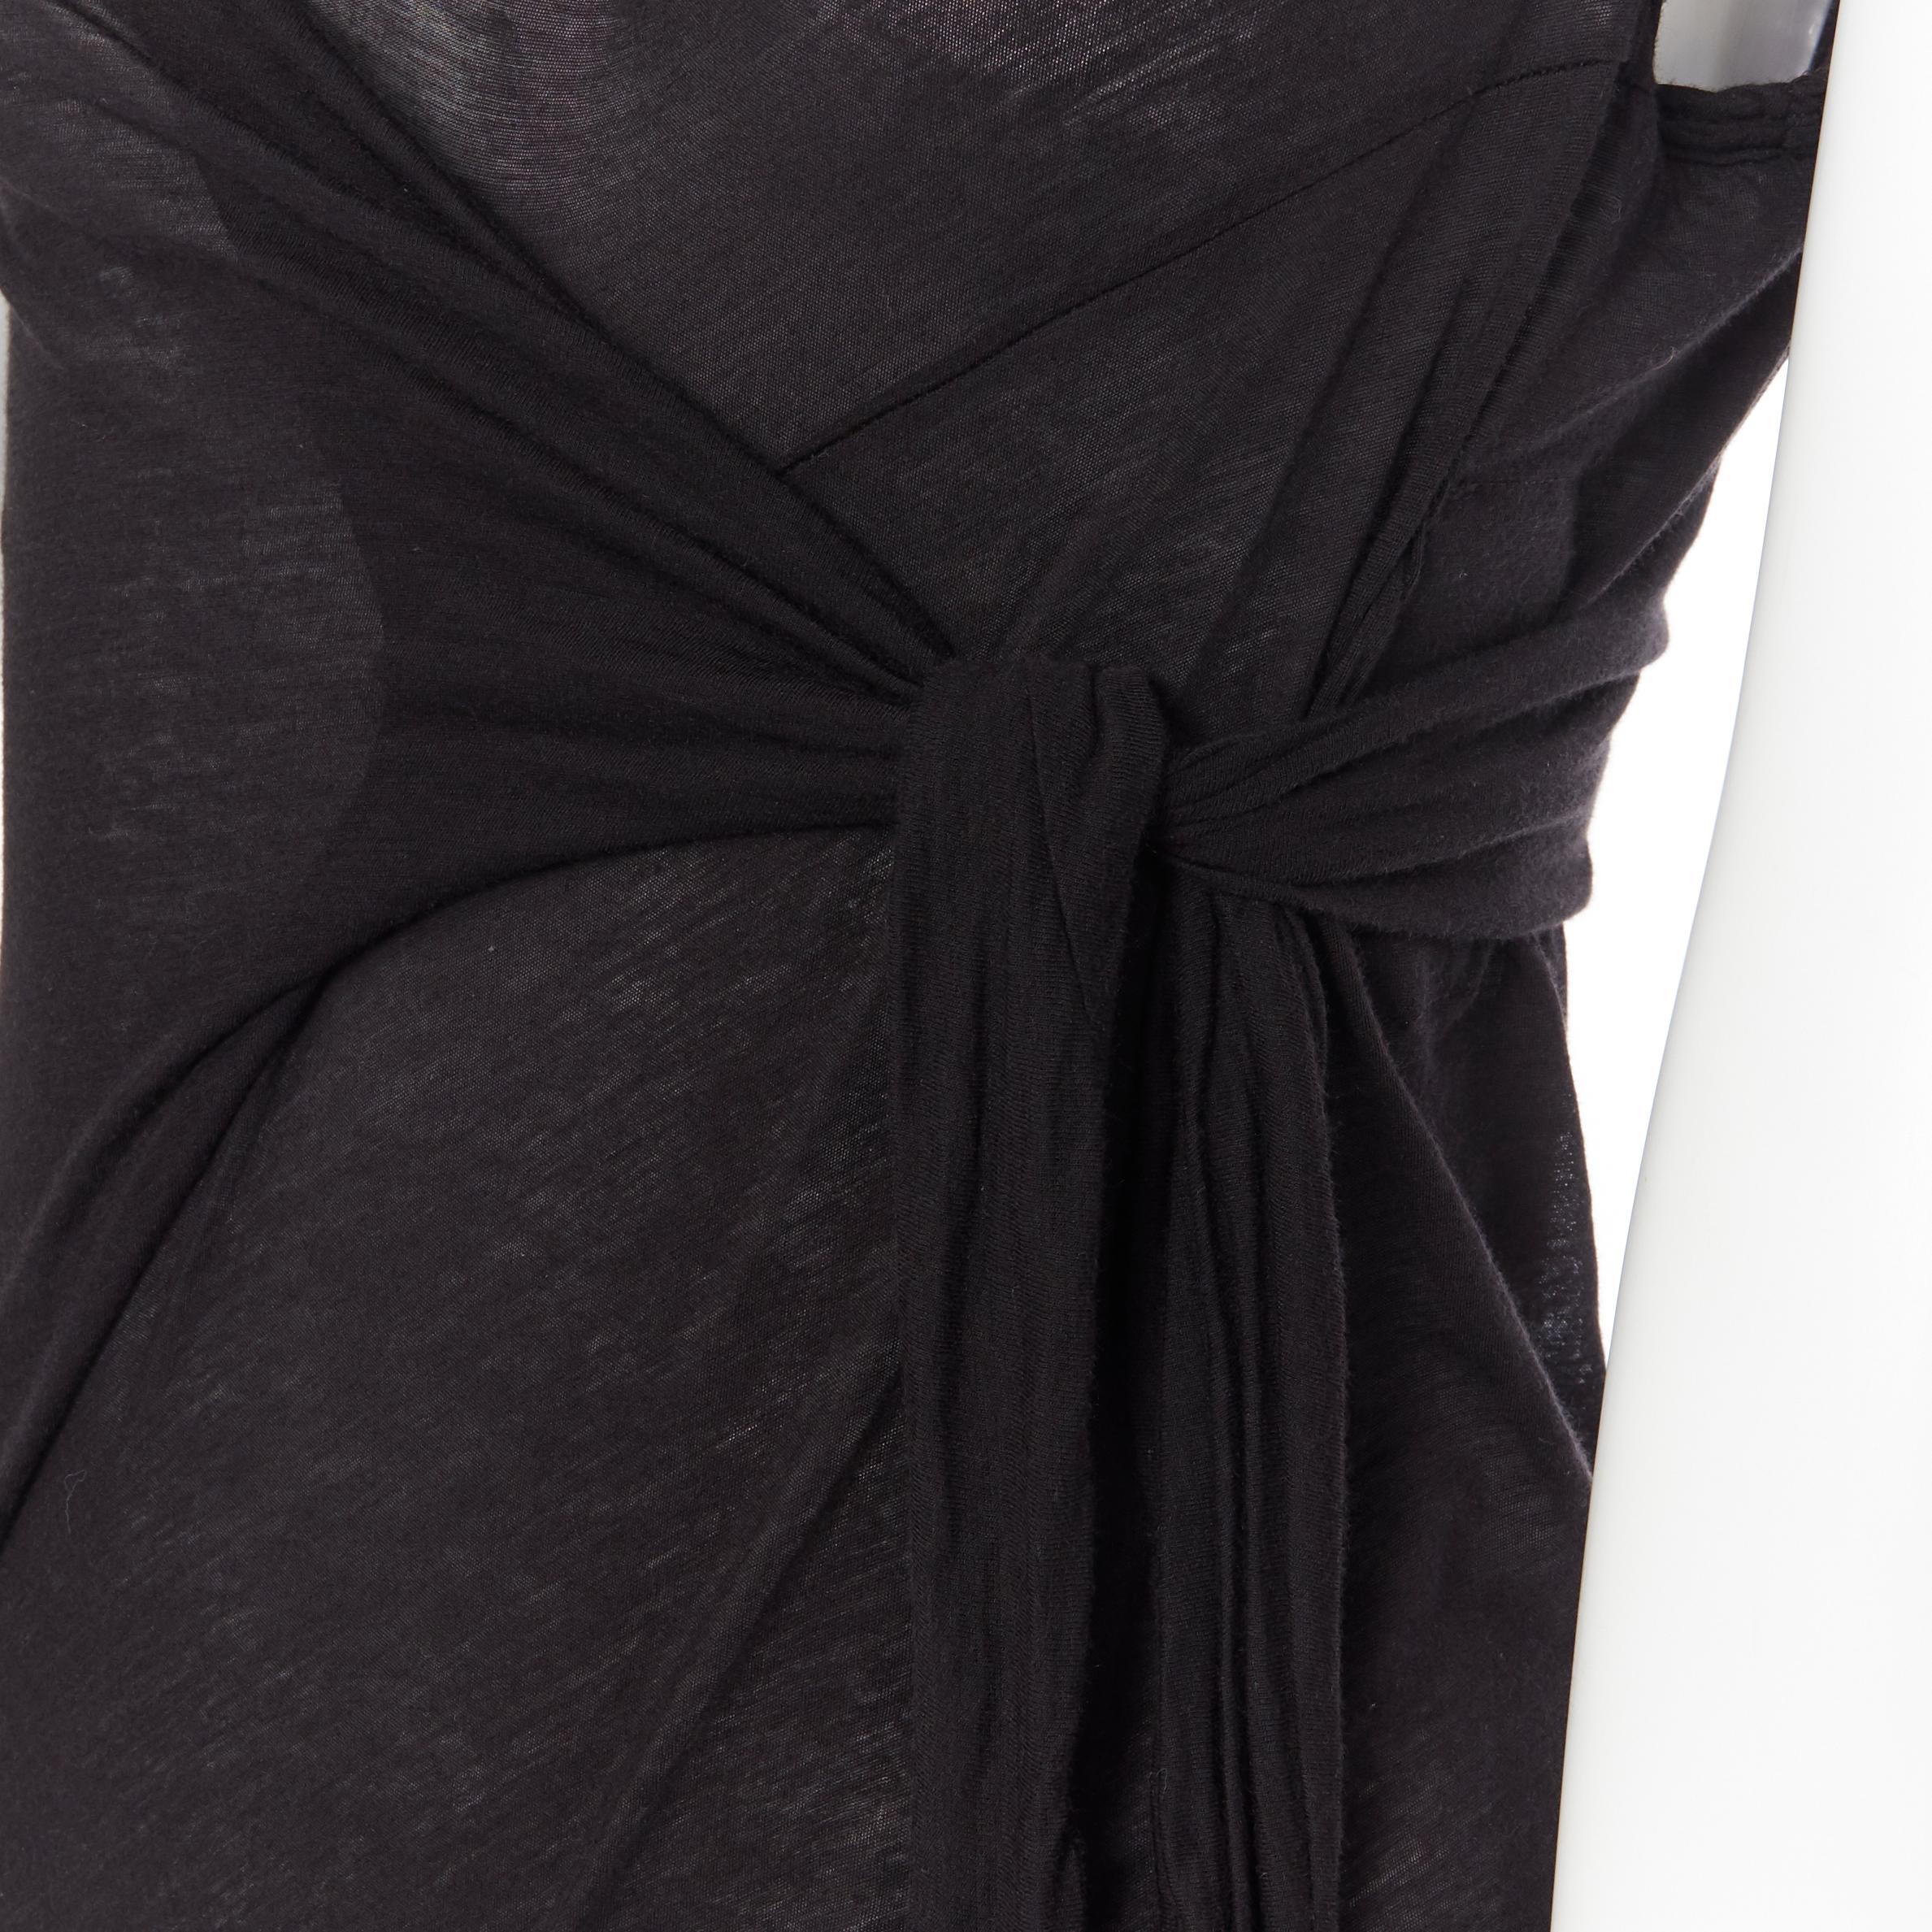 new DRKSHDW RICK OWENS black cotton jersey tie knot drape bias maxi dress XS
Brand: Rick Owens
Designer: Rick Owens
Collection: Spring Summer 2018
Model Name / Style: Tie Knot dress
Material: Cotton
Color: Black
Pattern: Solid
Extra Detail: Fine